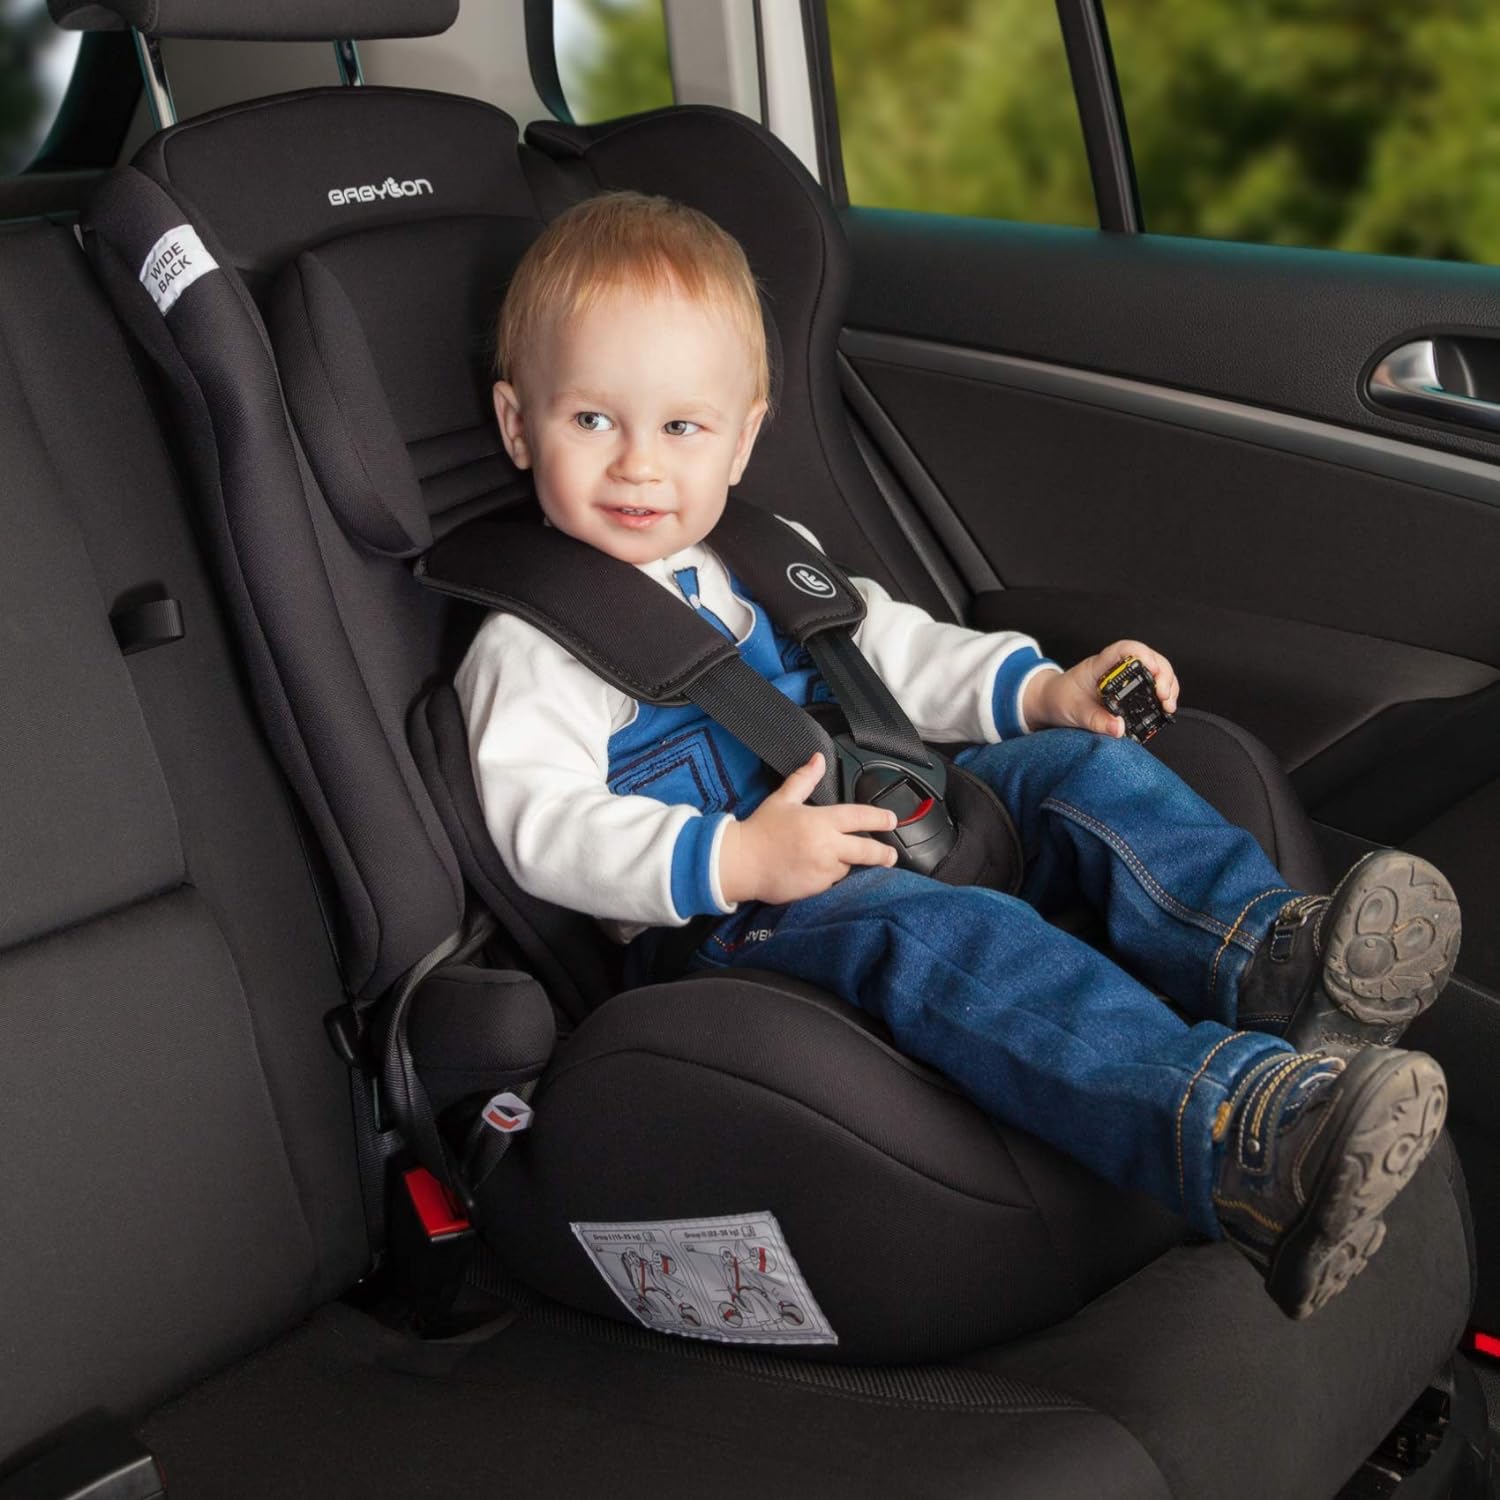 BABYLON Baby Seat Auto Protect Child Car Seat Group 1/2/3, Child Seat 9-36 kg (1 to 12 Years). Child Seat with Top Tether 5-Point Seat Belt. ECE R44/04 Red